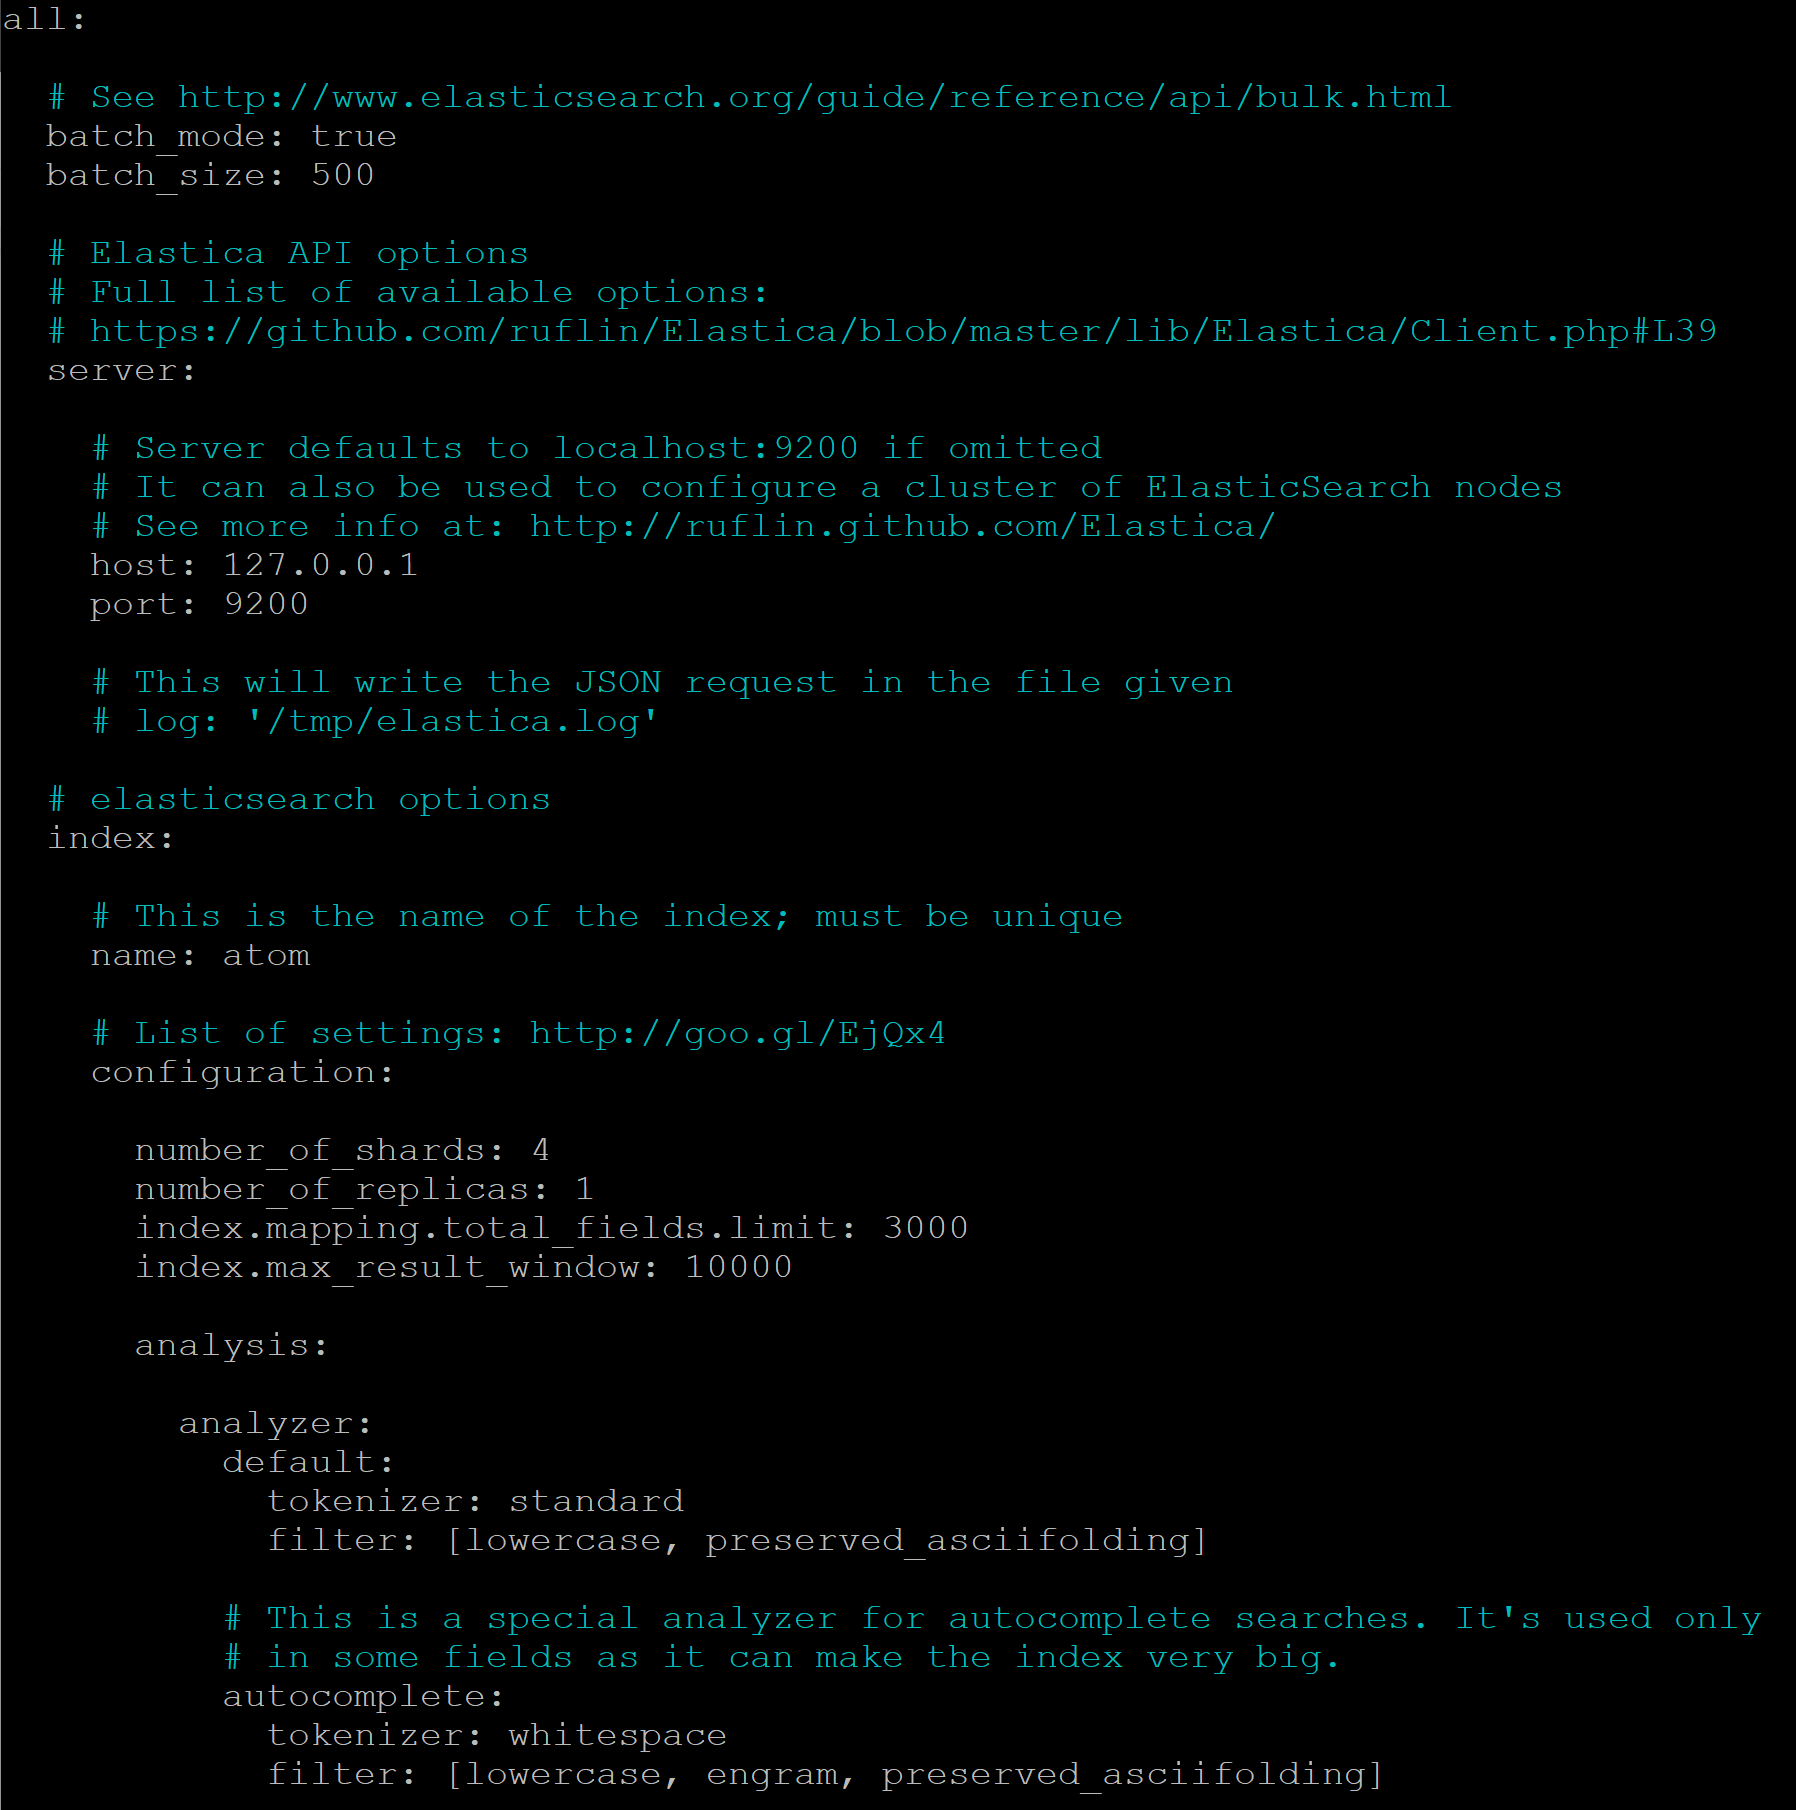 An image of the search configuration file